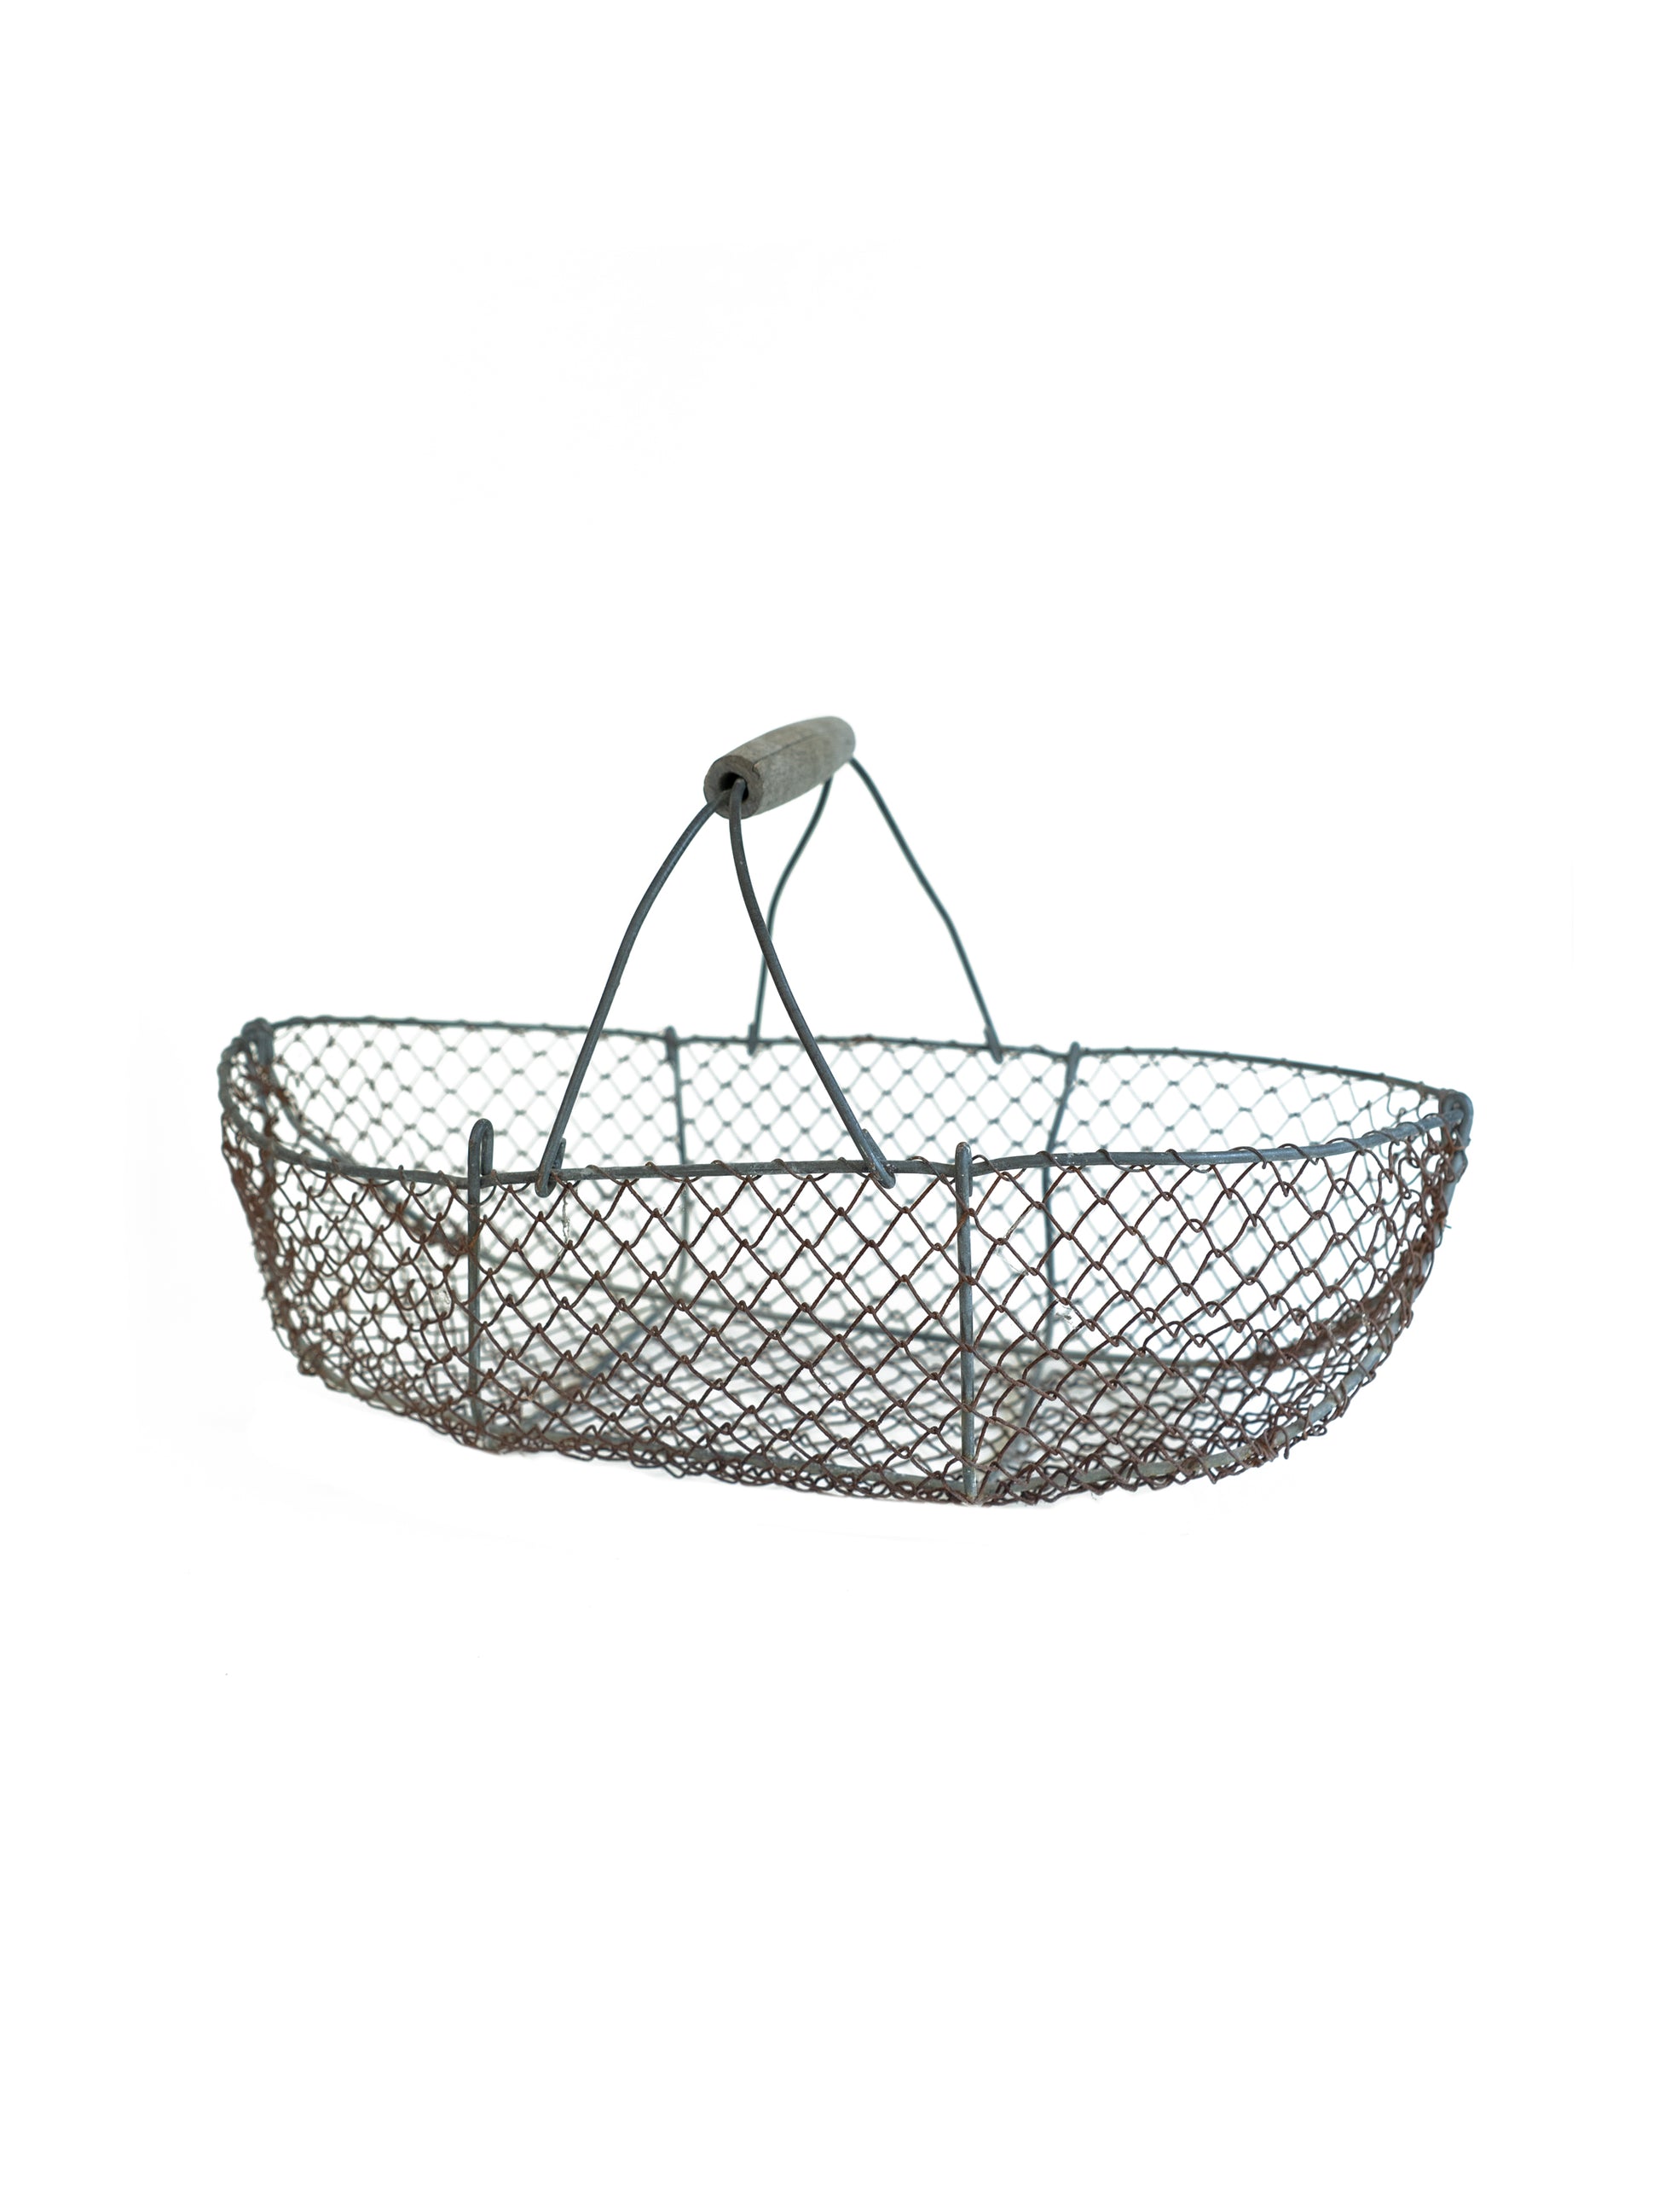 Vintage 1920s French Fruit Wire Basket Weston Table